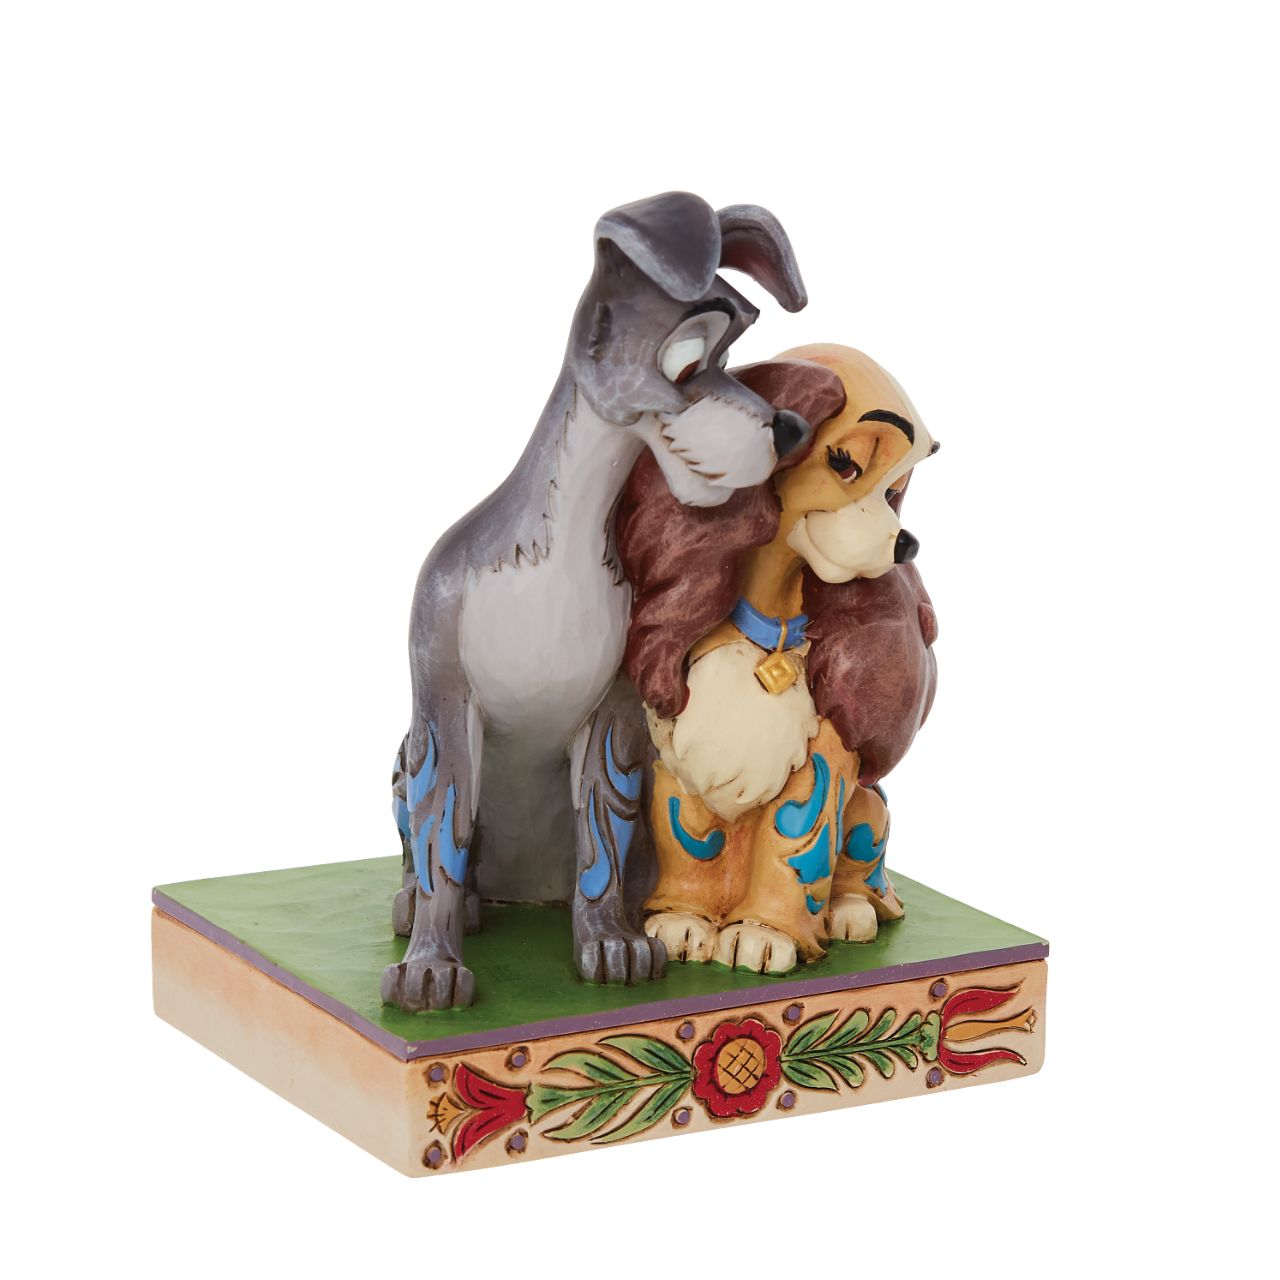 Jim Shore Disney Lady & the Tramp Love Figurine  With a love story as pure as gold, this pair of precious pups snuggle together sweetly. With intricate Jim Shore rosemaling and inspiring intimacy, this Lady and the Tramp piece steals hearts. This enchanting piece is a charming addition to any room.